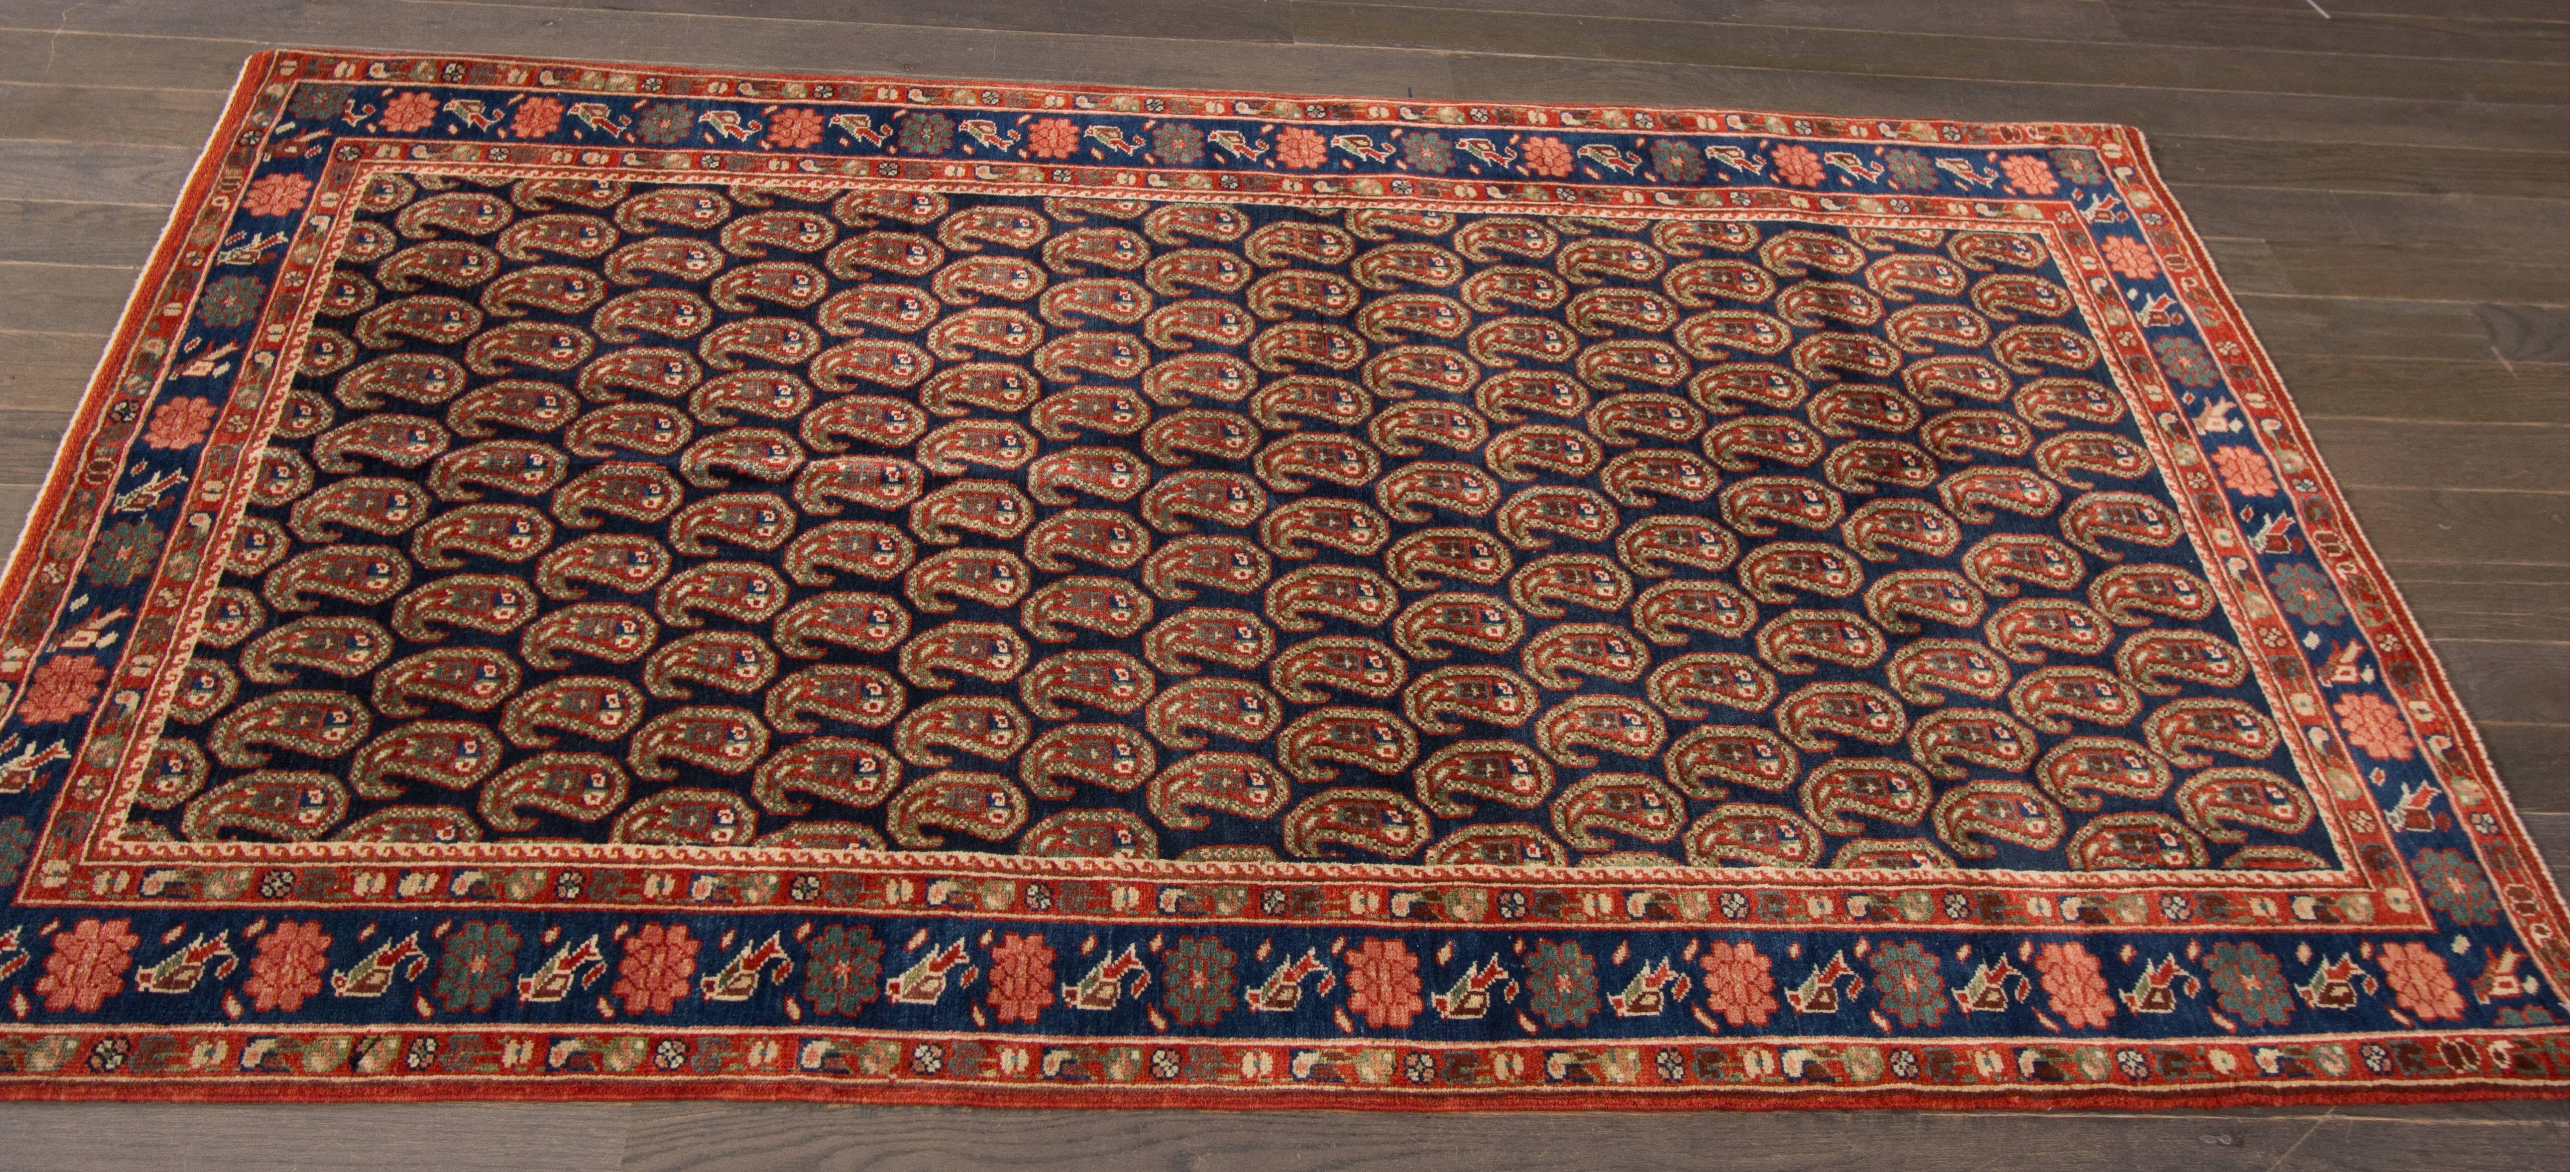 A hand-knotted Modern Bidjar with an artistic pattern on a navy blue field. Accents of red, brown and green throughout the piece. This rug measures 3'.6 x 5'.9.